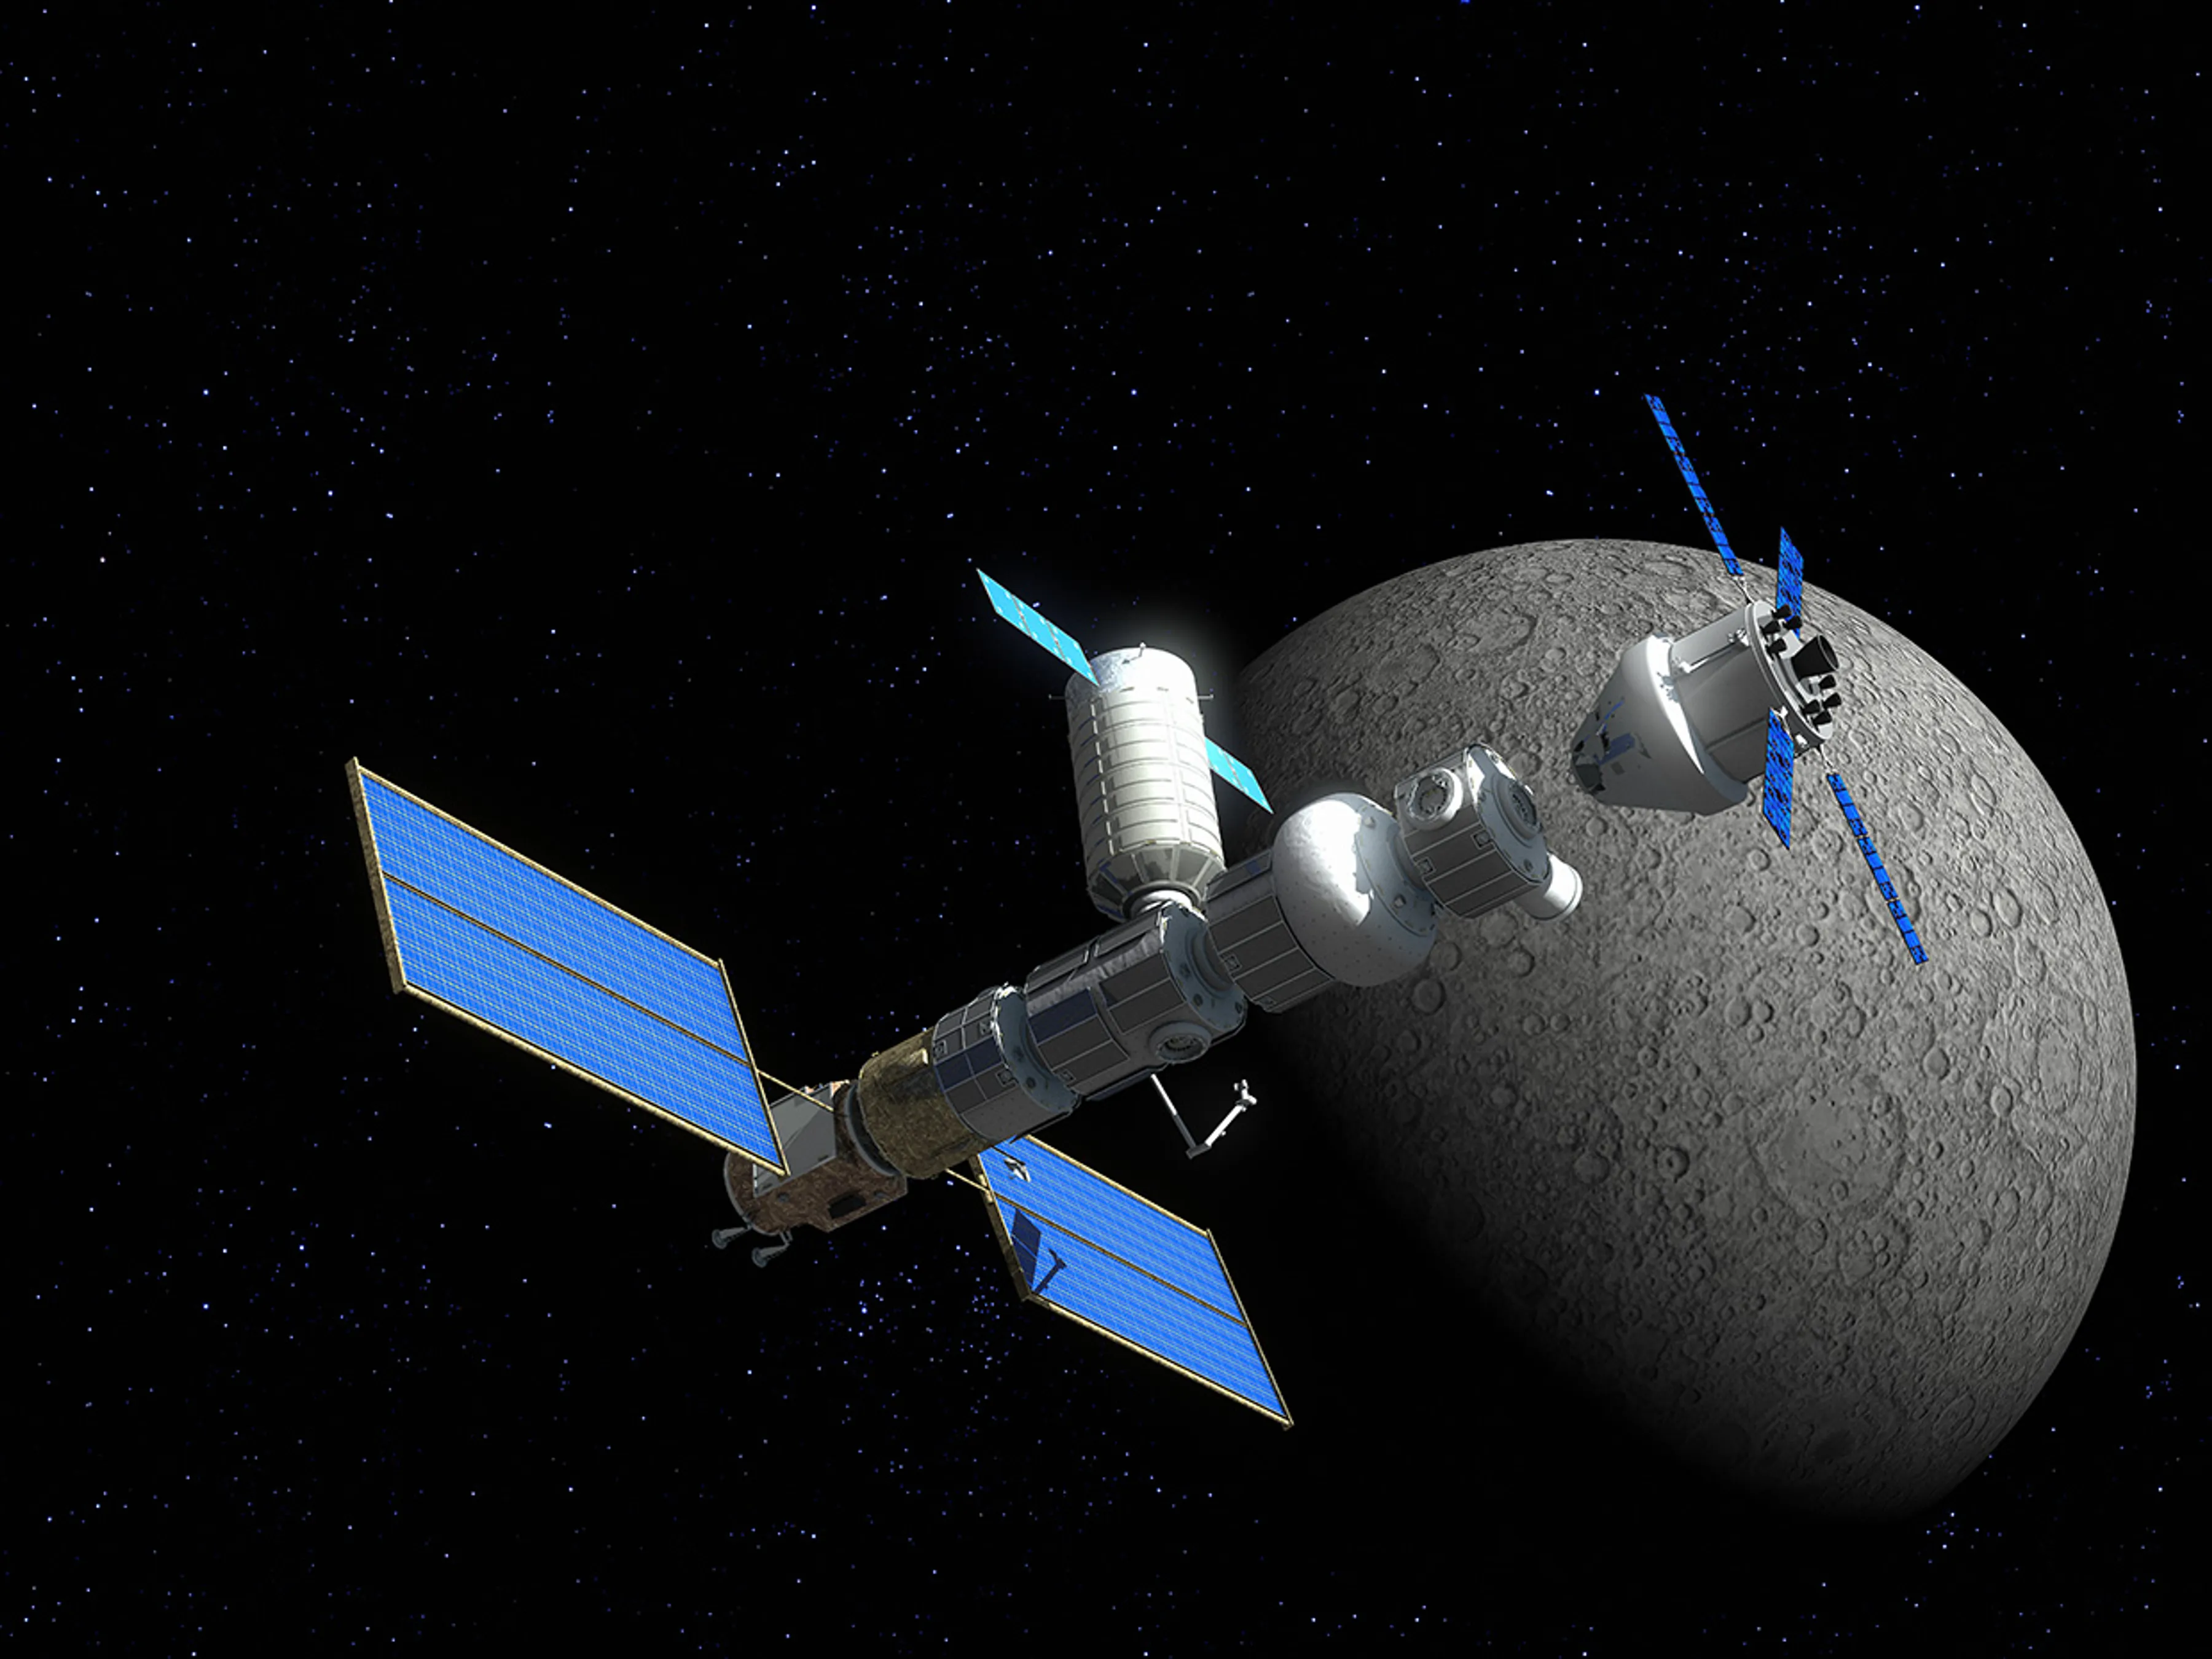 "The Lunar Gravitational-wave Antenna requires strong partnership with industry"